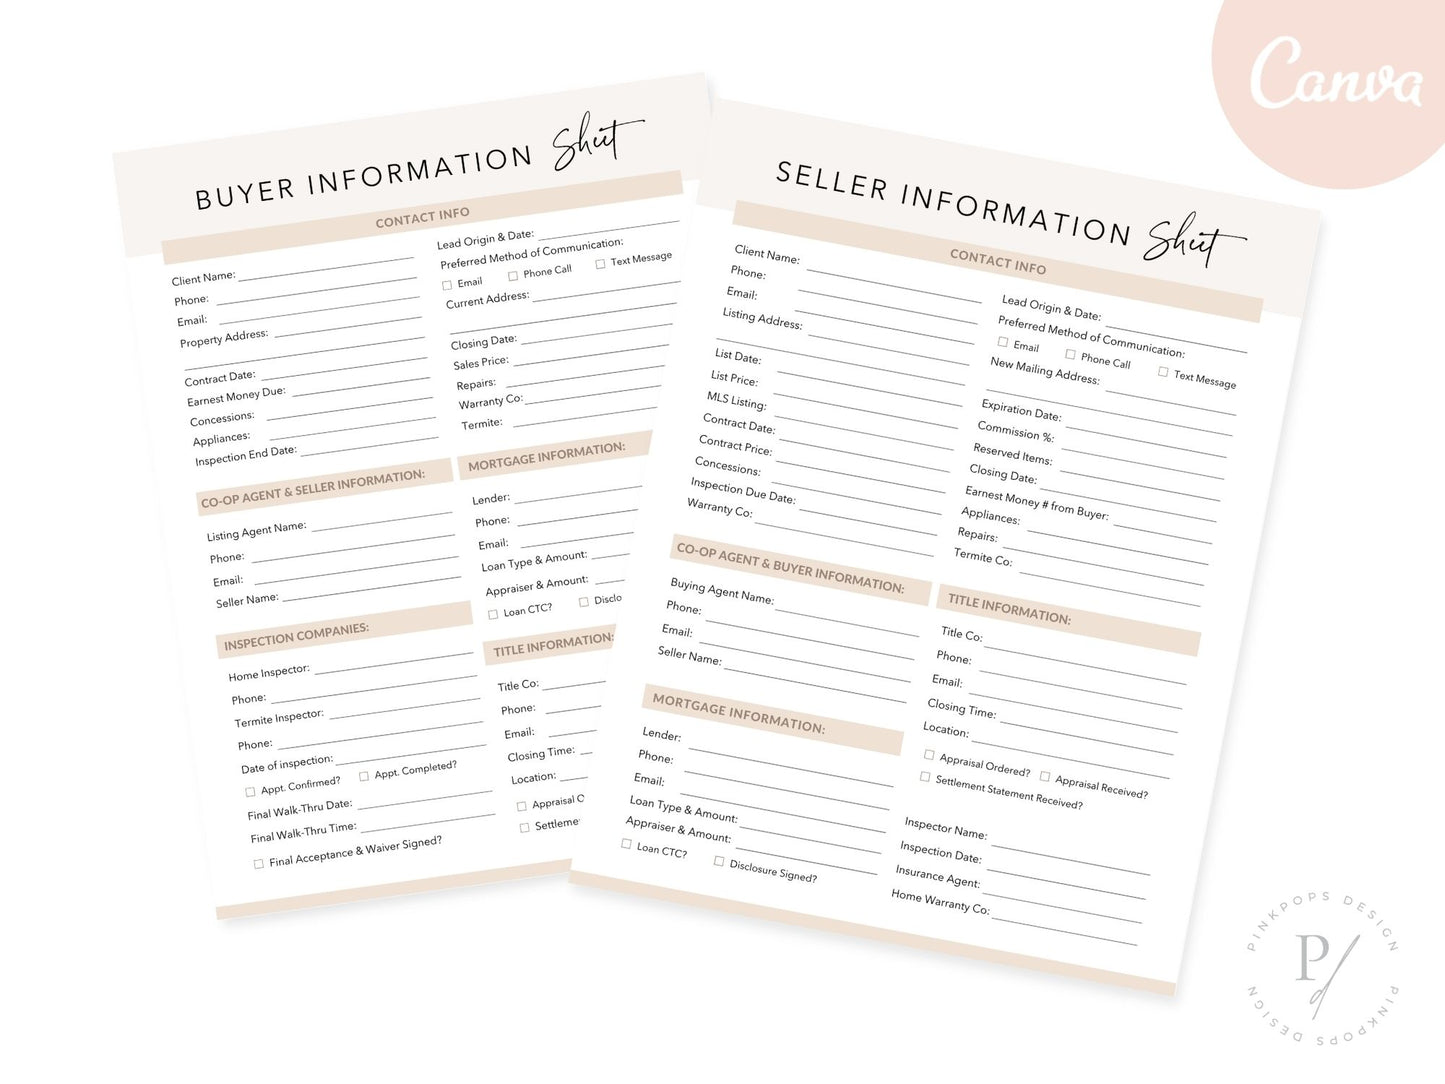 Real Estate Buyer & Seller Information Sheet - Editable template for gathering essential details from both buyers and sellers in the real estate transaction process.